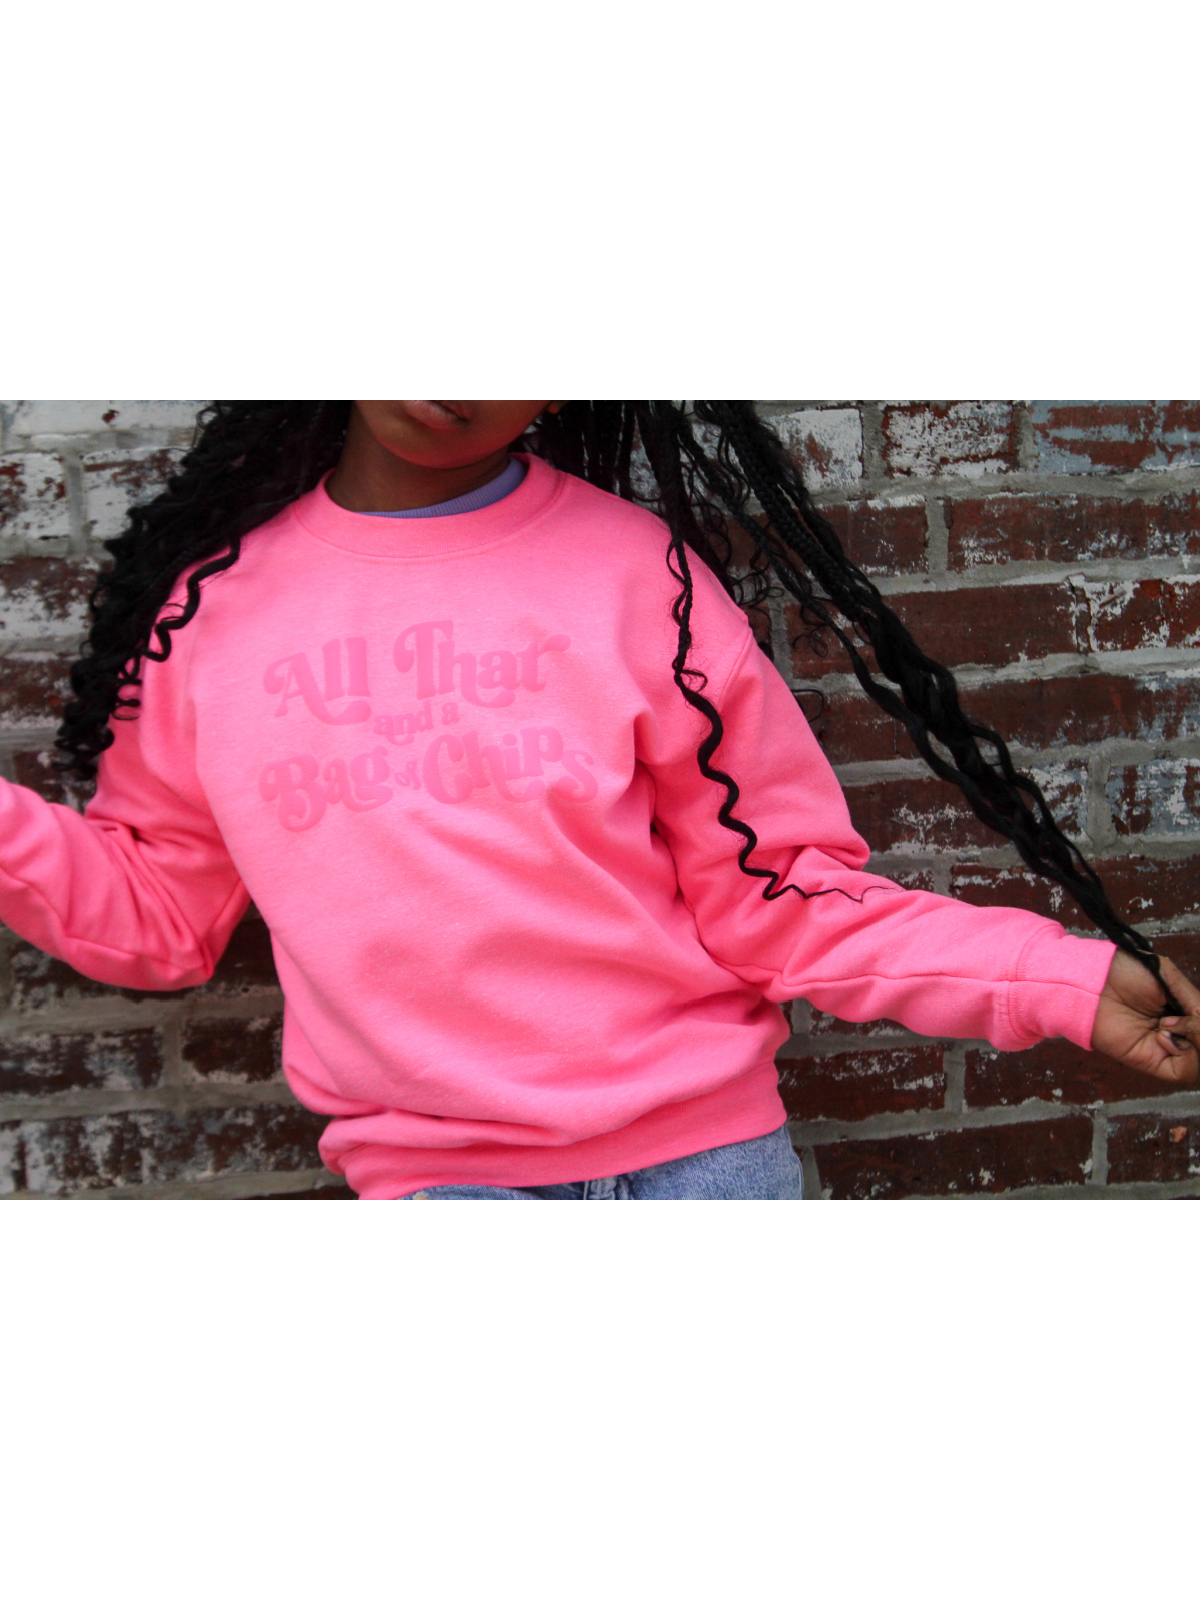 All That and a Bag of Chips Matching Mommy and Me Sweatshirts - Bright Pink